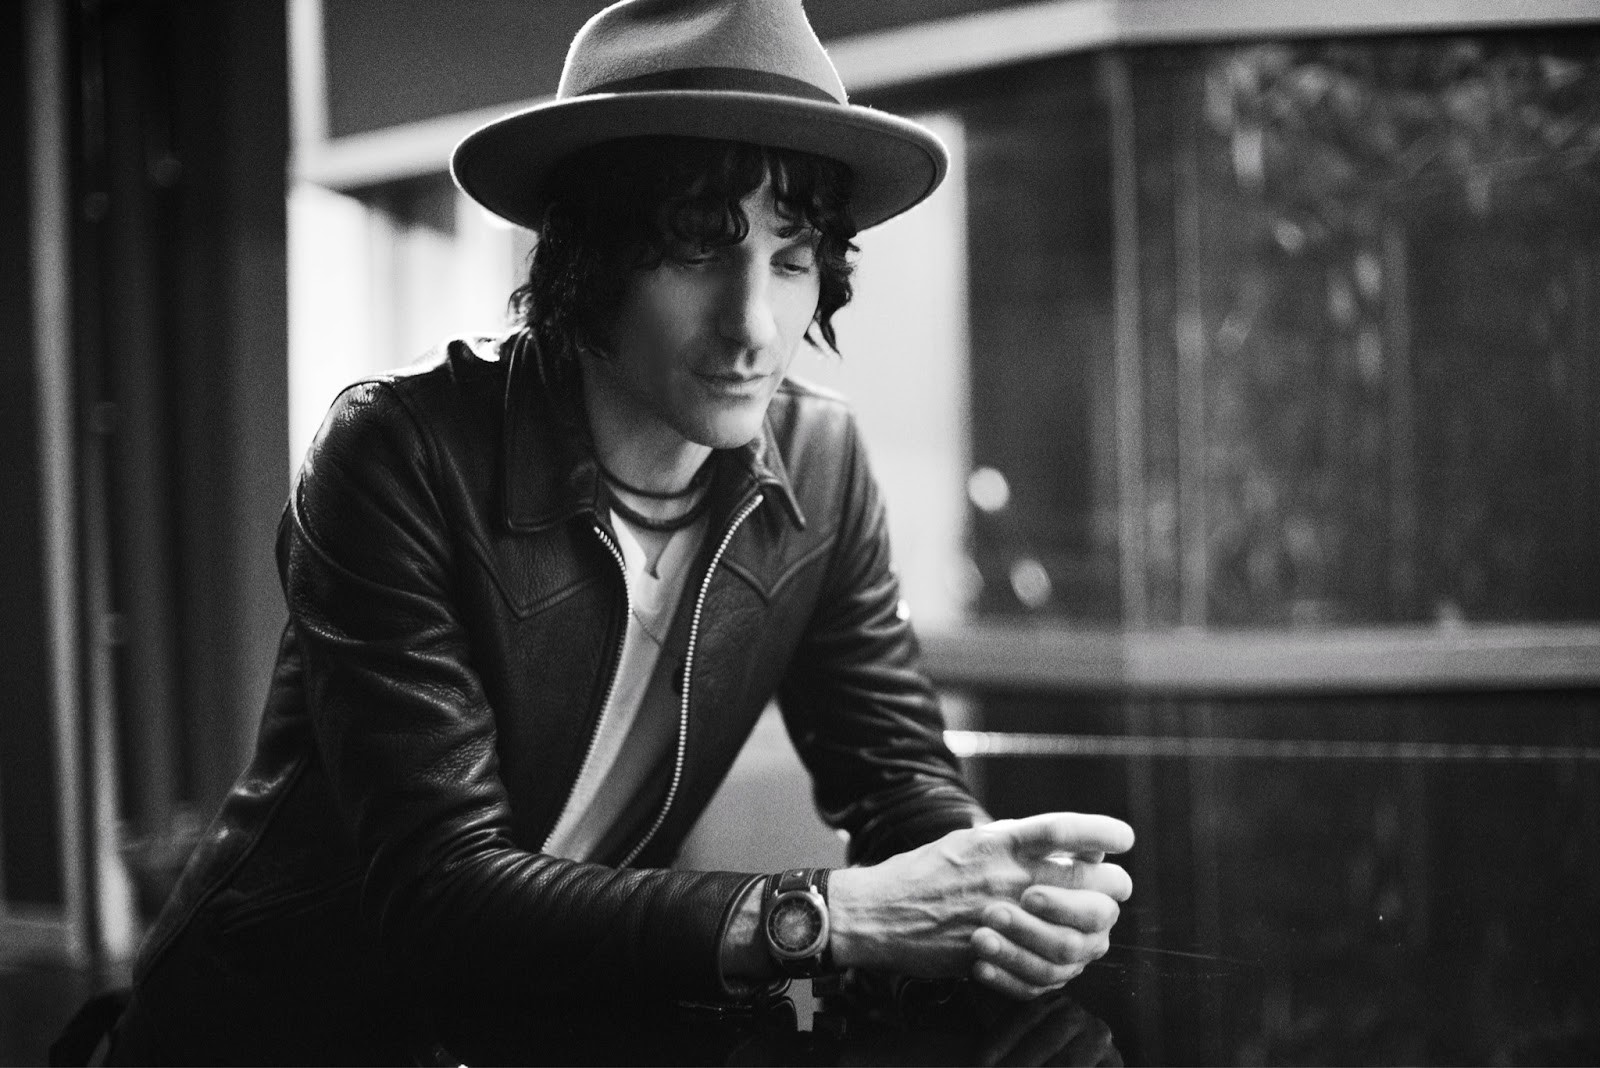 Jesse Malin Announces Expanded 20Th Anniversary Reissue Of 'The Fine Art Of Self Destruction' W/ Bonus Lp, Yours Truly, News, March 25, 2023